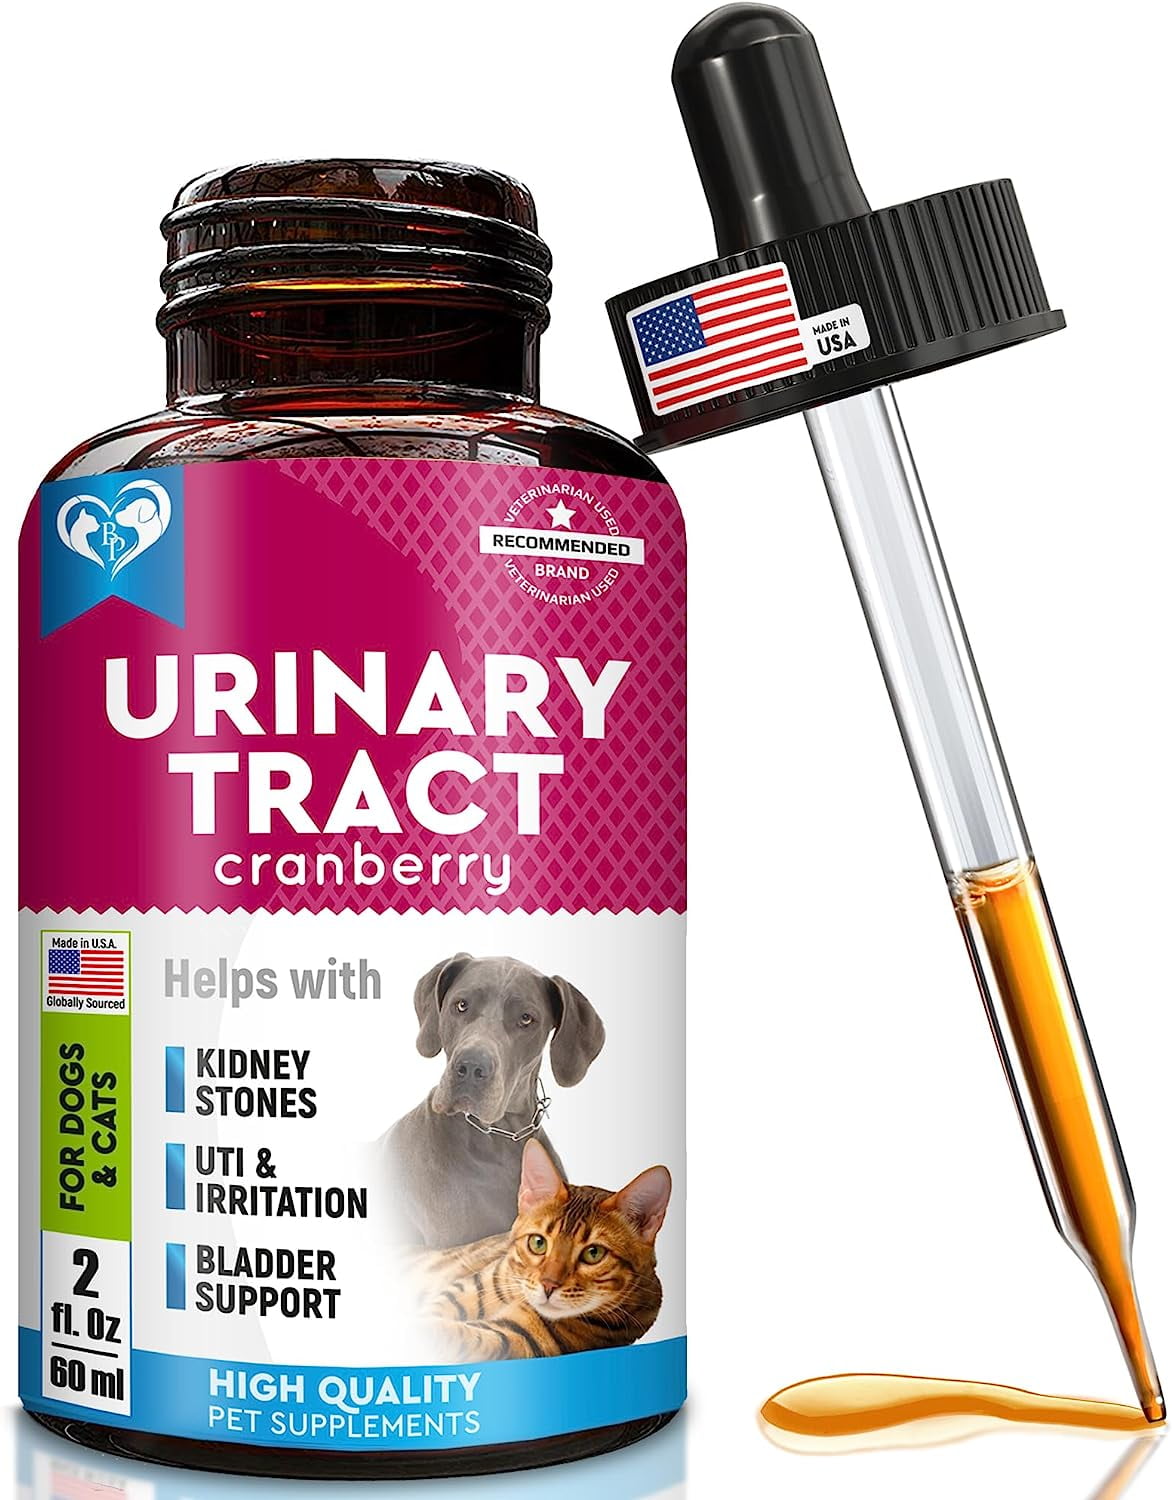 Best Cranberry Supplement For Uti